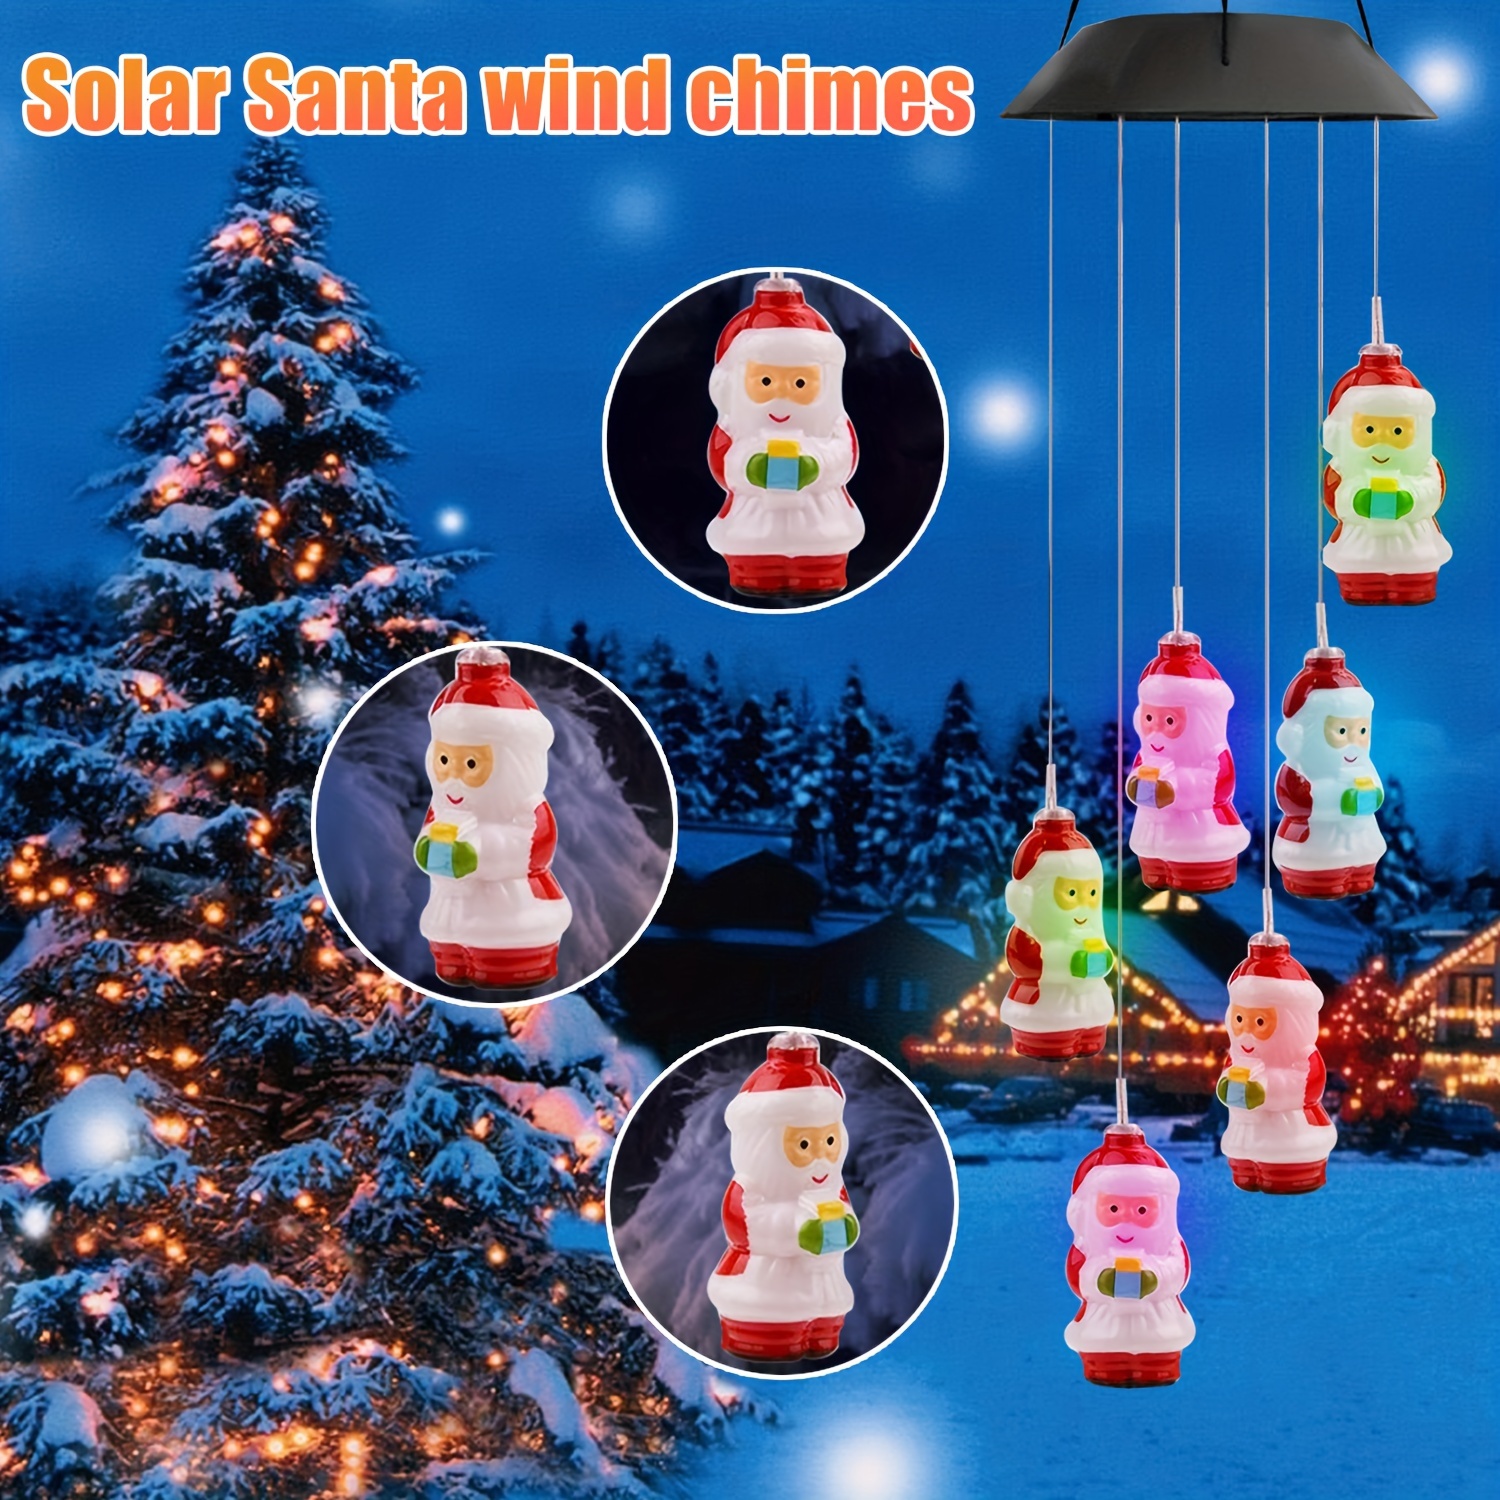 Pompotops Wind Chimes Christmas Solar Wind Chime Santa Claus Light s Spiral  String Hanging Outdoor Garden Yard Christmas Decor Light Lamp 